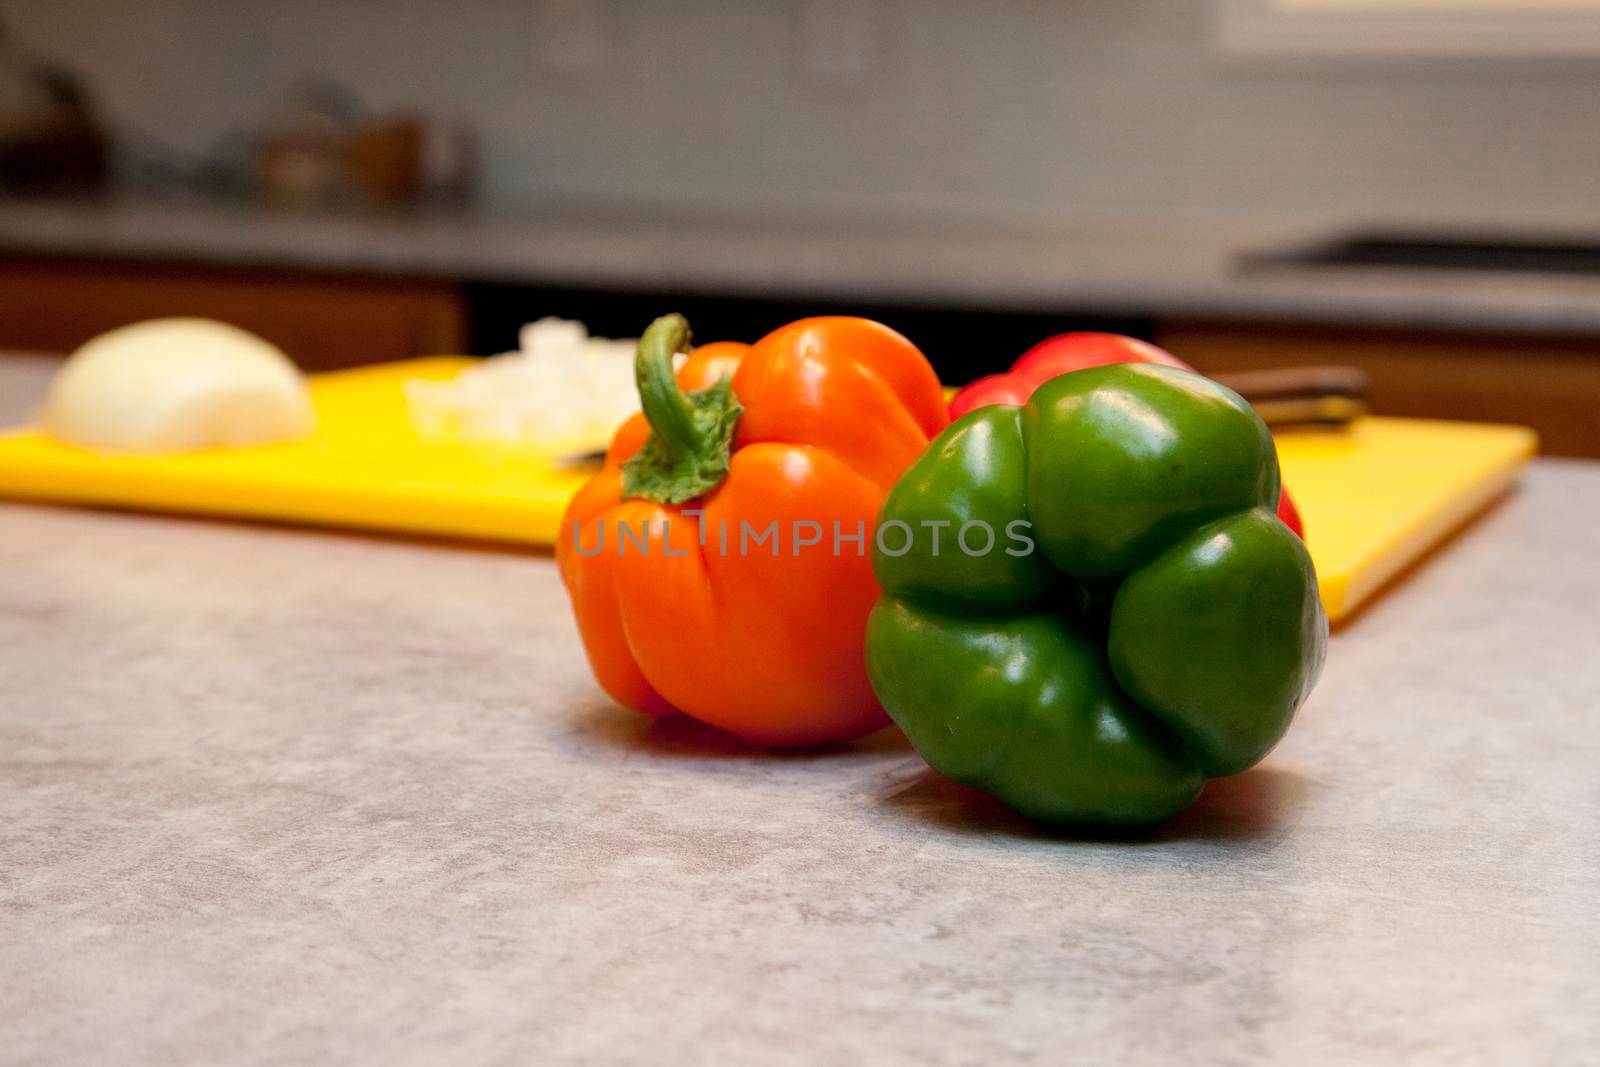  Red and green bell peppers next to a cutting board in the kitchen with copy space 